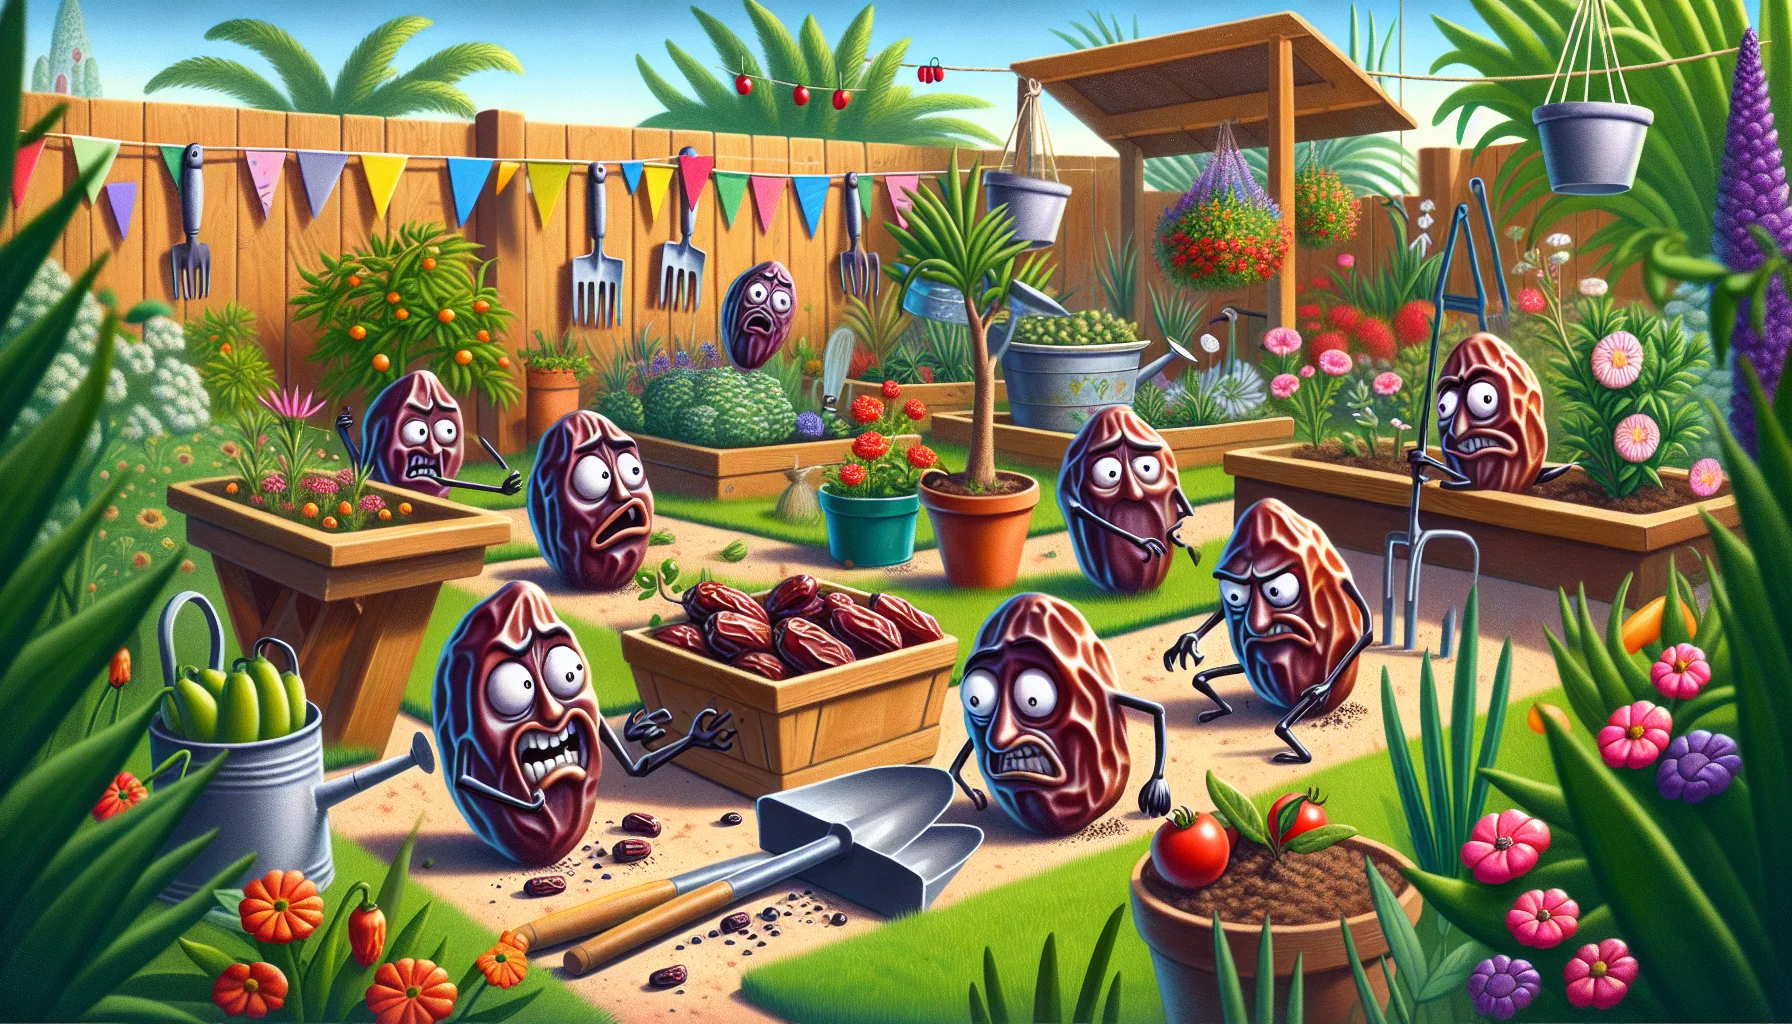 Create a humorous and realistic illustration that showcases 'dates' (the fruit) exhibiting characteristics of spoiling or 'going bad', in a way analogous to misbehavior. This is happening in a lively garden setting populated by variety of plants, flowers and garden tools. The image has a playful tone, possibly personifying the dates as they 'misbehave'. This scenario is designed to evoke laughter and draw people into the joy of gardening.